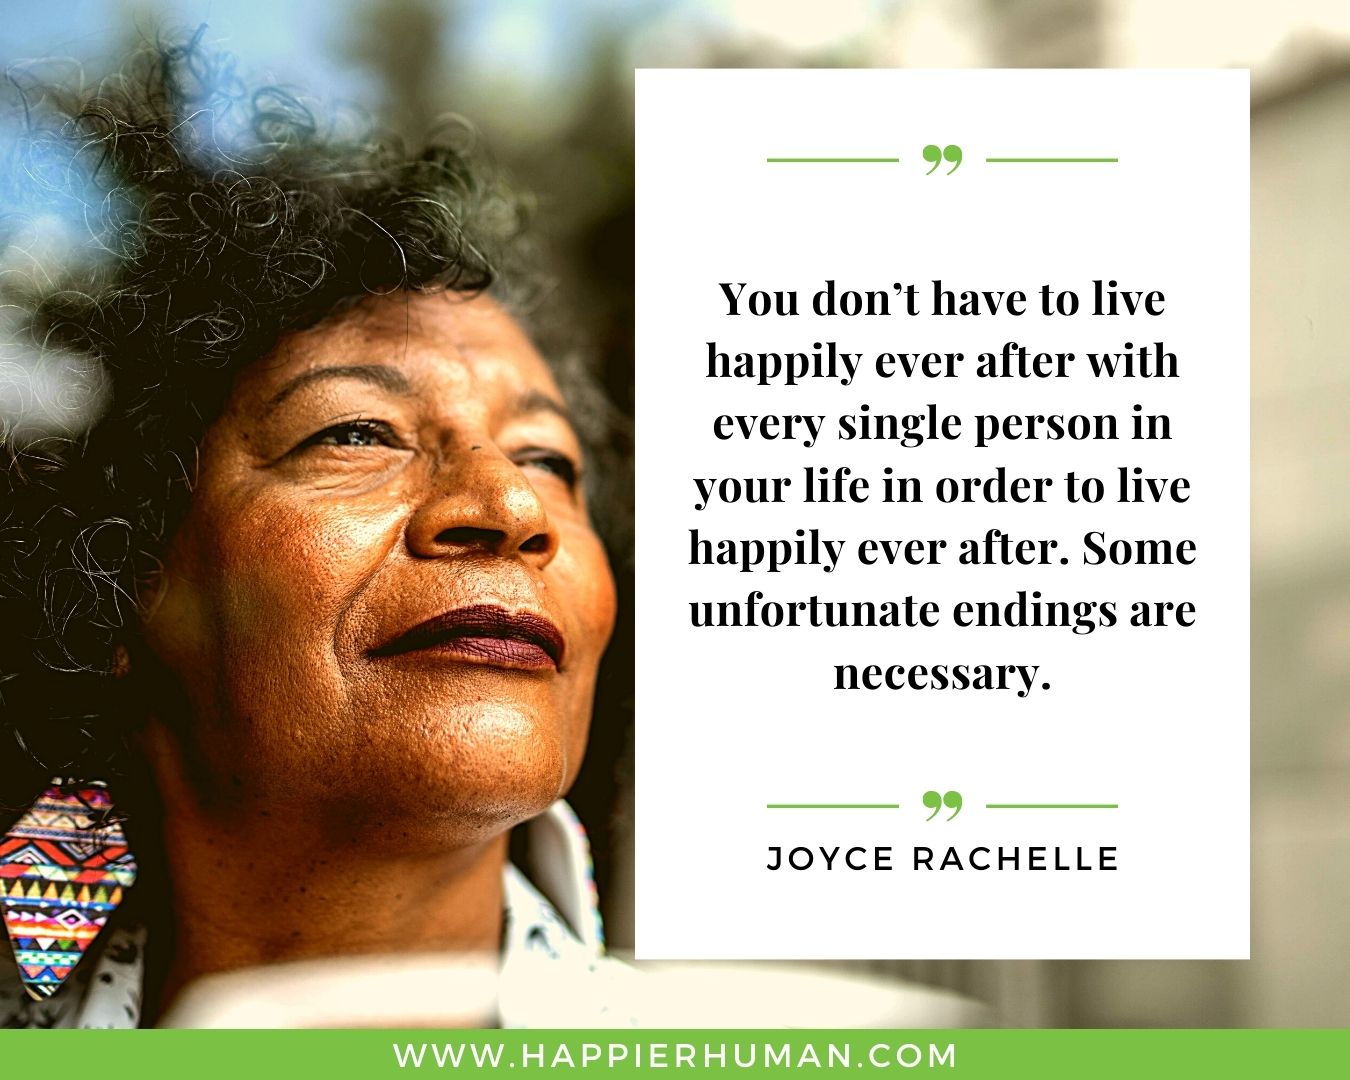 Toxic People Quotes - “You don’t have to live happily ever after with every single person in your life in order to live happily ever after. Some unfortunate endings are necessary.” – Joyce Rachelle